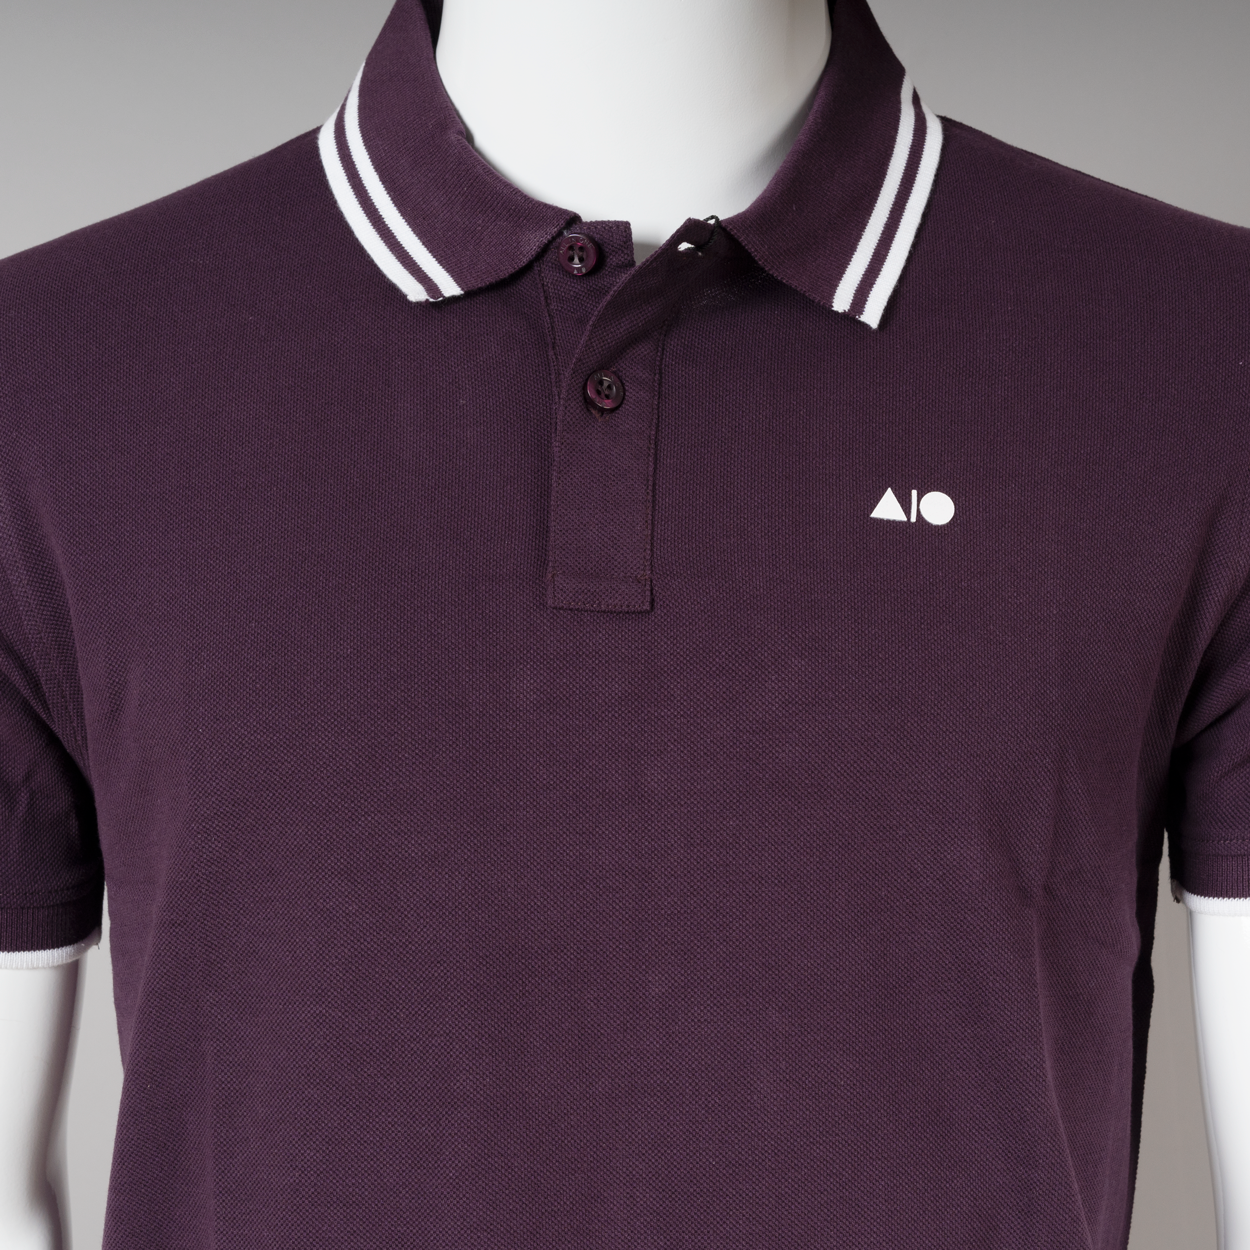 Mens Tipping Polo Shirt - Combo (Wine, Skyway & Forest Green)